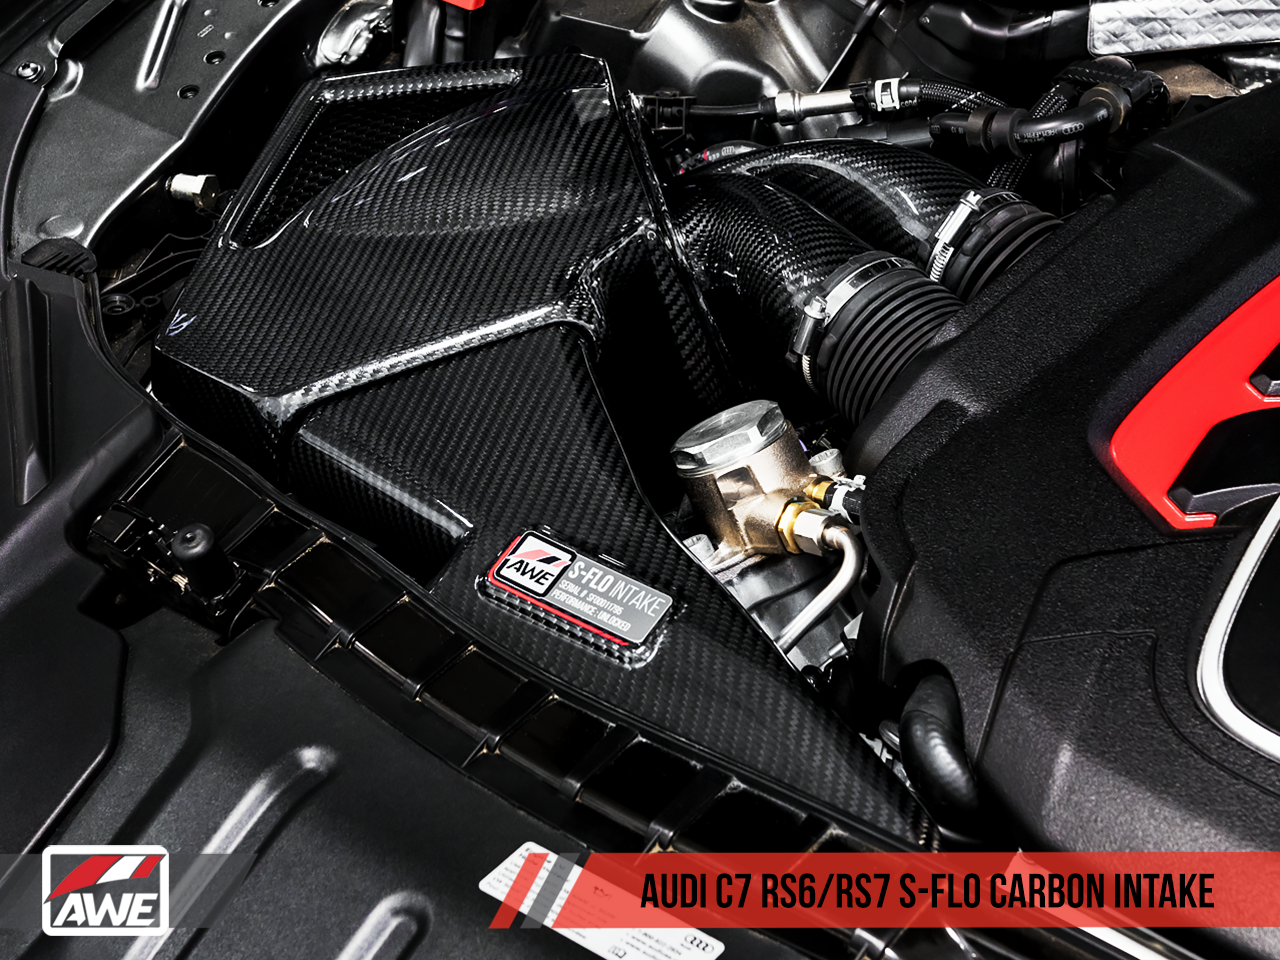 AWE S-FLO Carbon Intake for Audi C7 RS 6 / RS 7